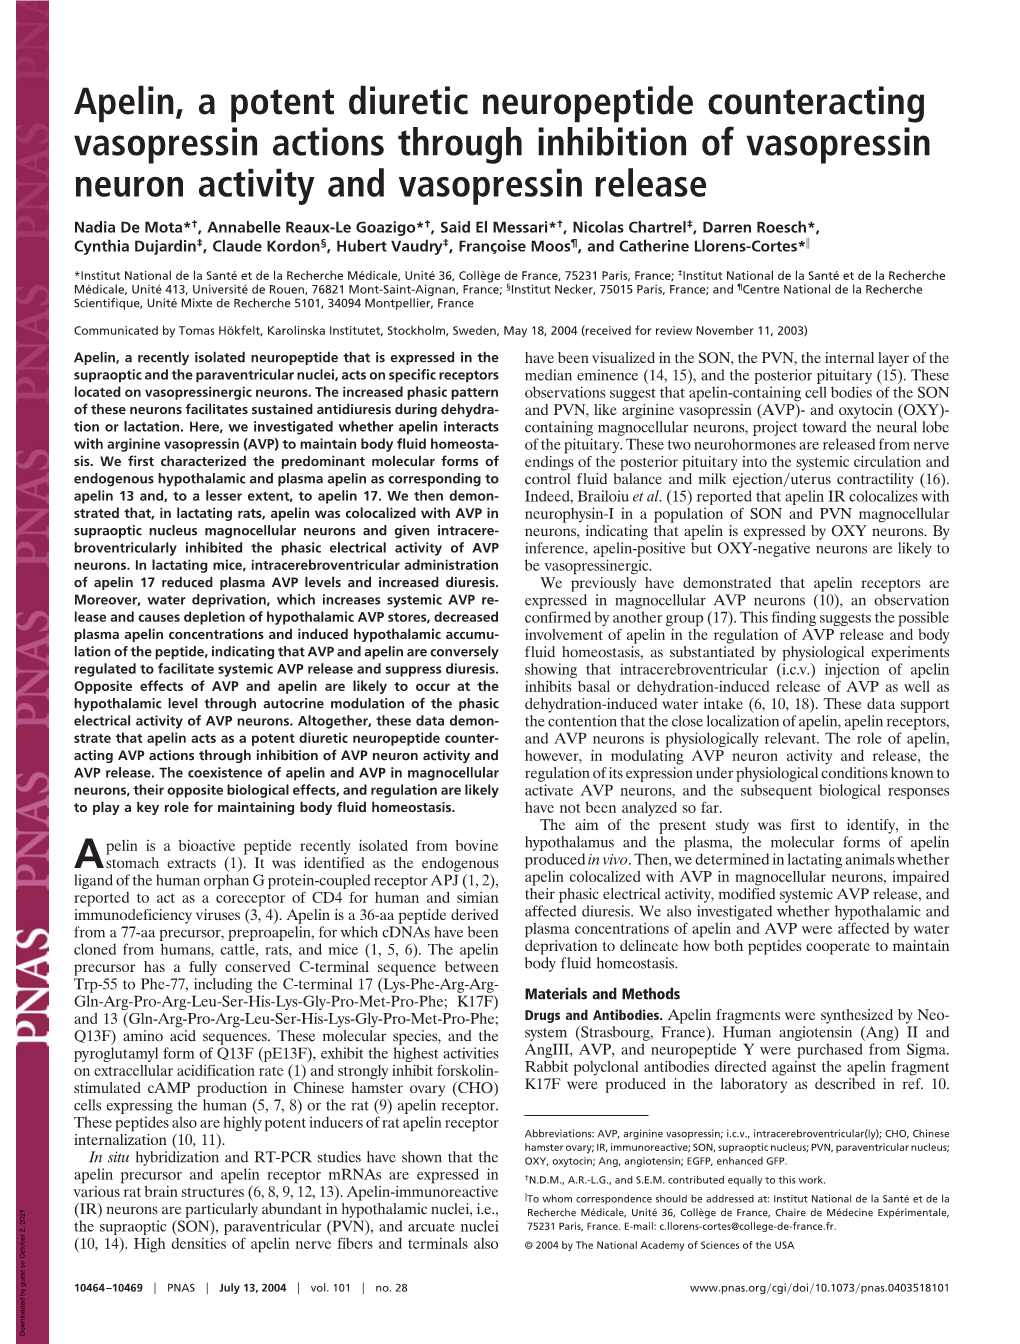 Apelin, a Potent Diuretic Neuropeptide Counteracting Vasopressin Actions Through Inhibition of Vasopressin Neuron Activity and Vasopressin Release